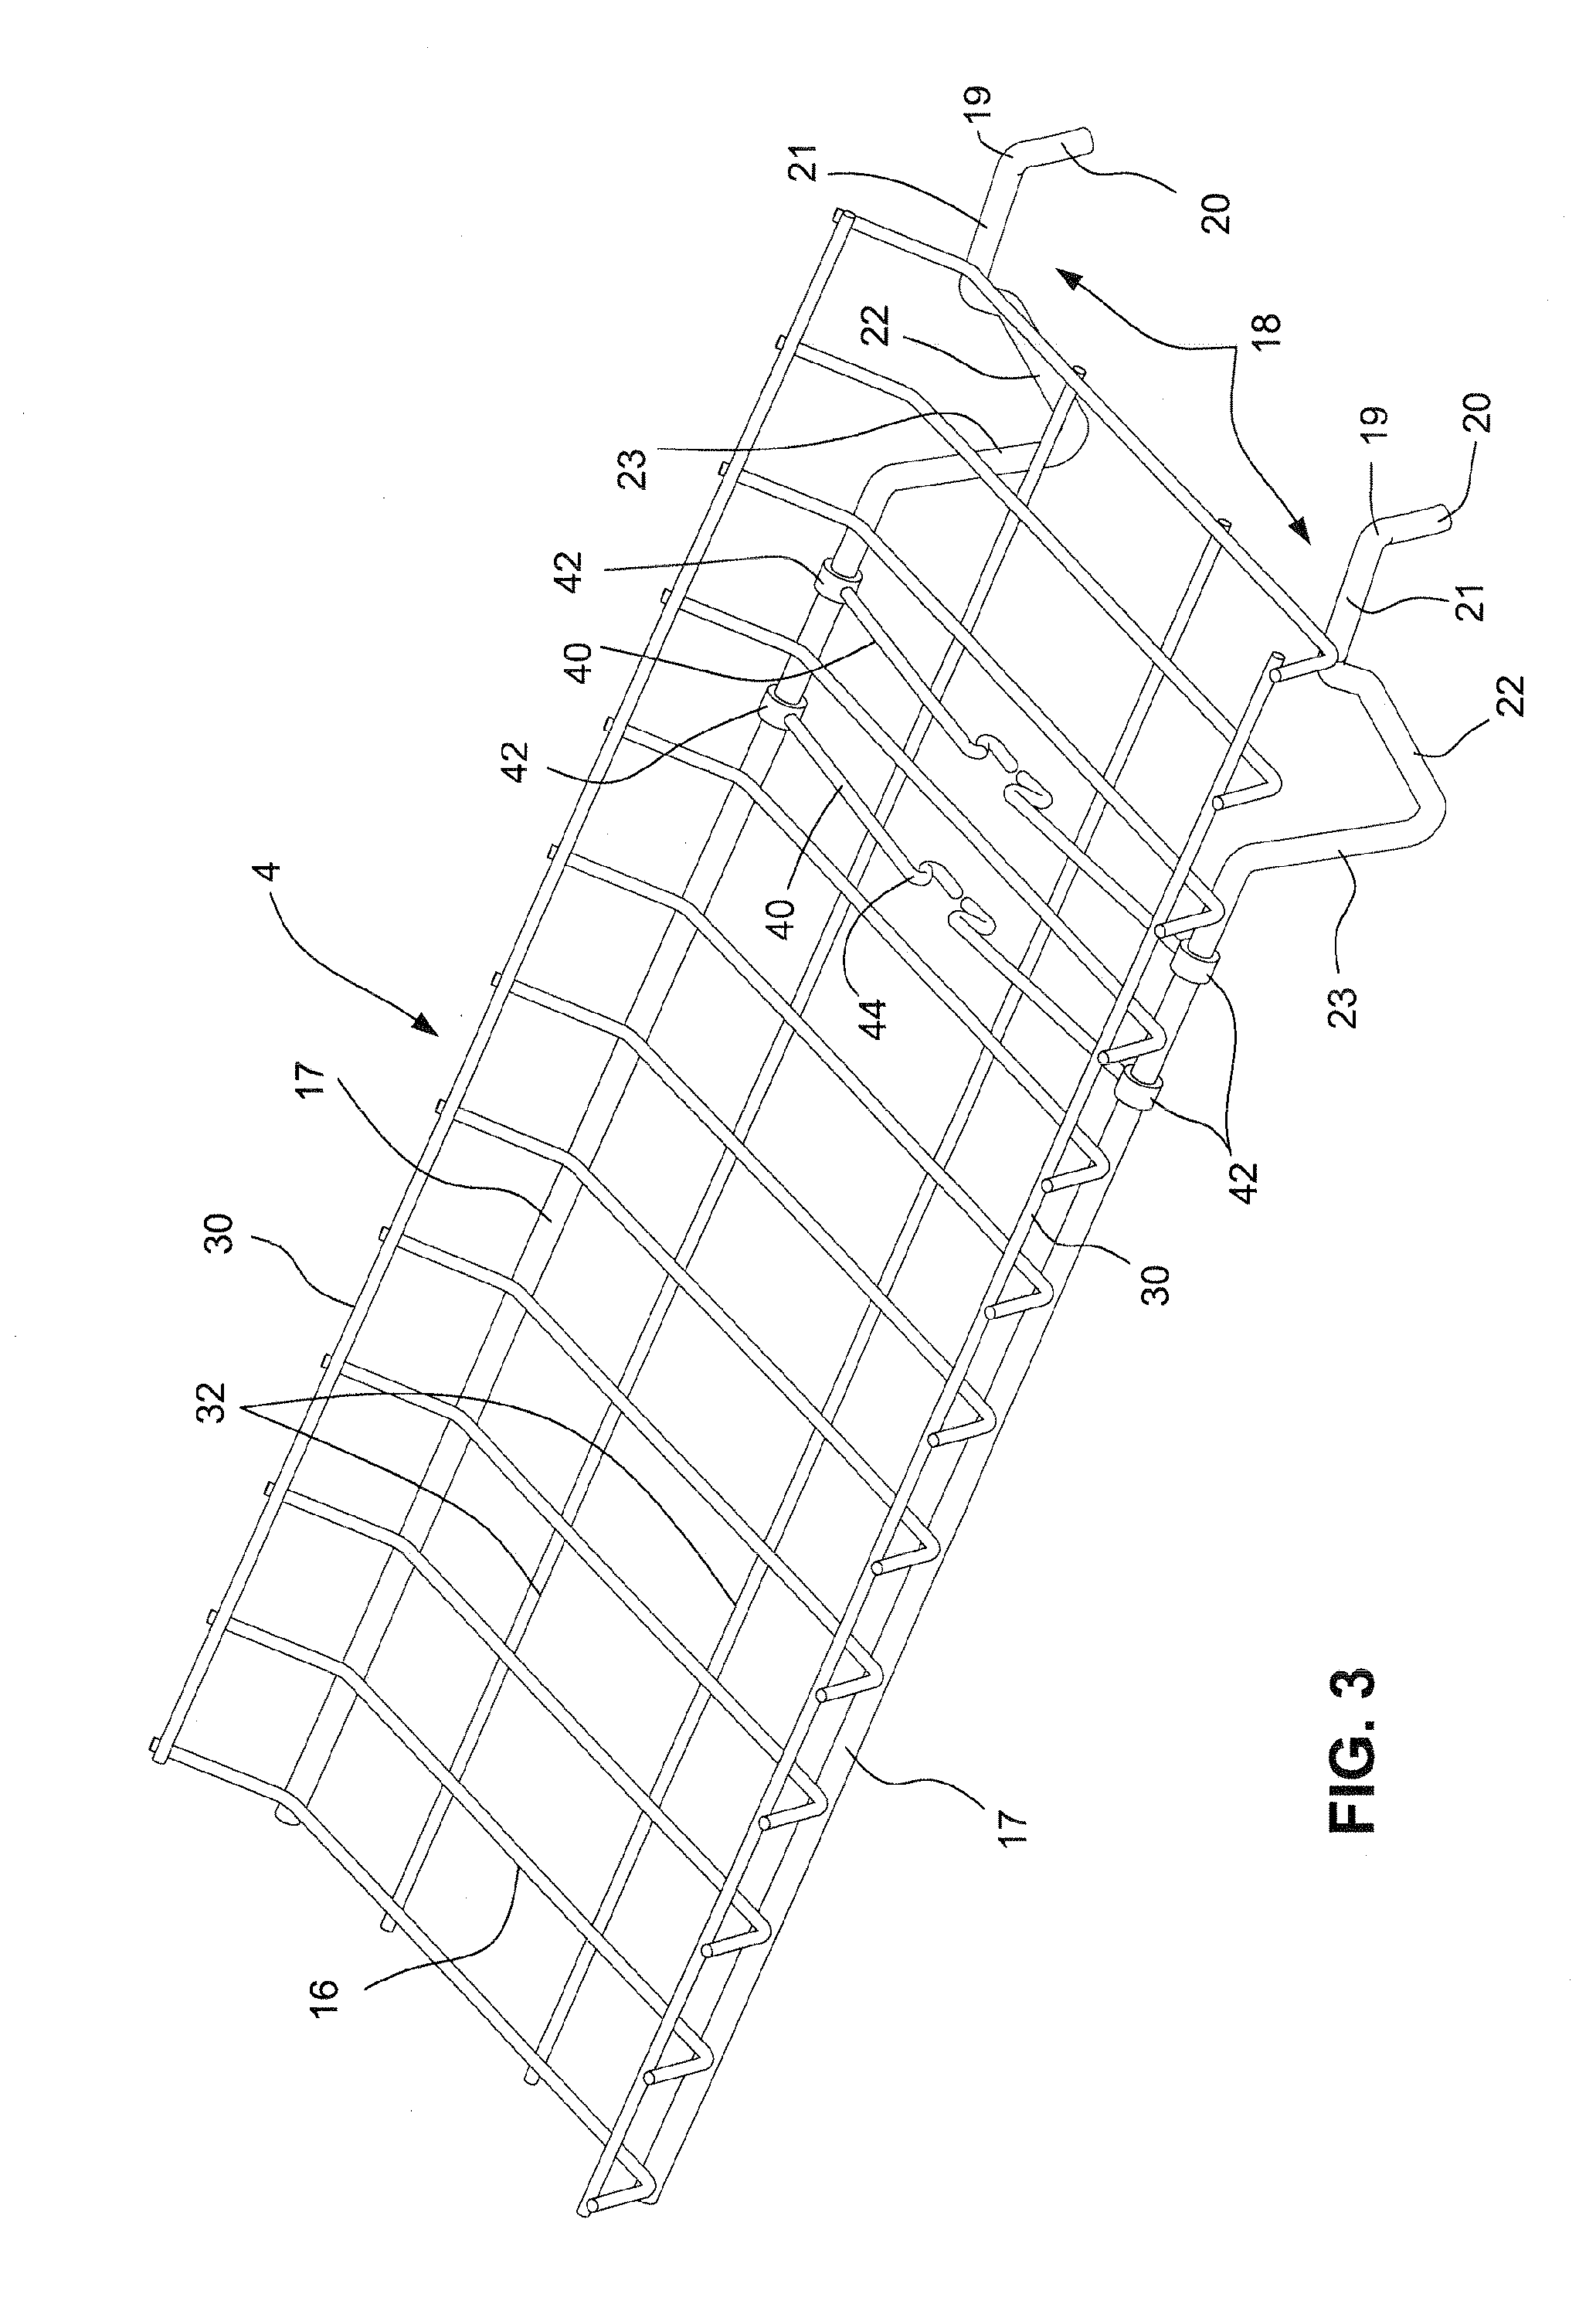 Appliance with a support rack having a plurality of support elements